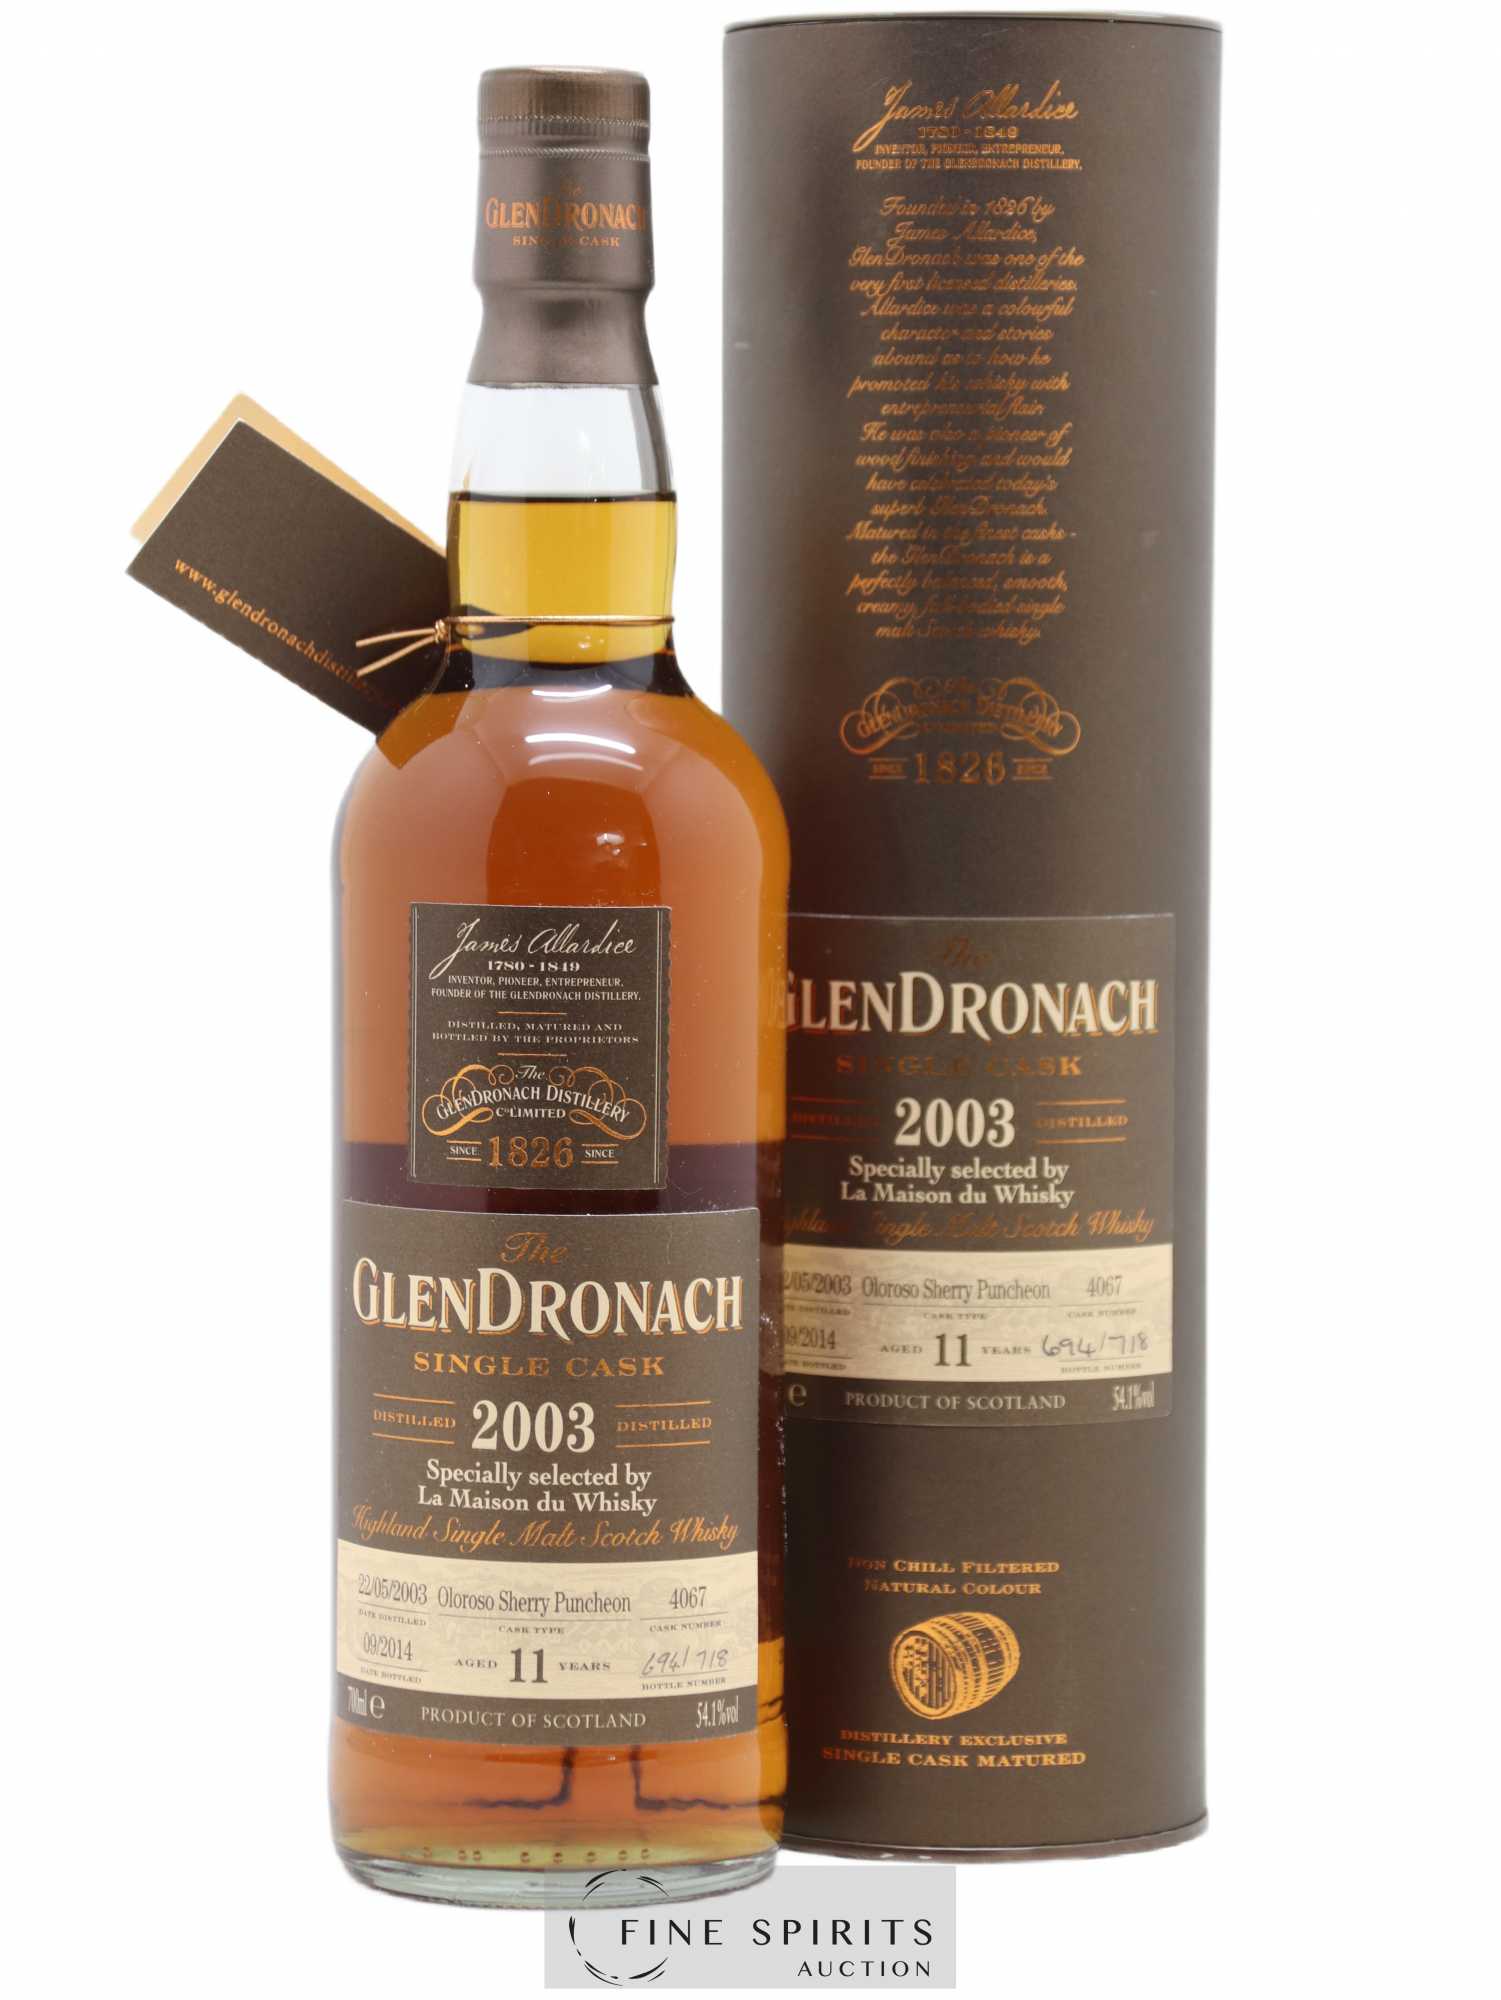 The Glendronach 11 years 2003 Of. Oloroso Sherry Puncheon n°4067 - One of 718 - bottled 2014 LMDW